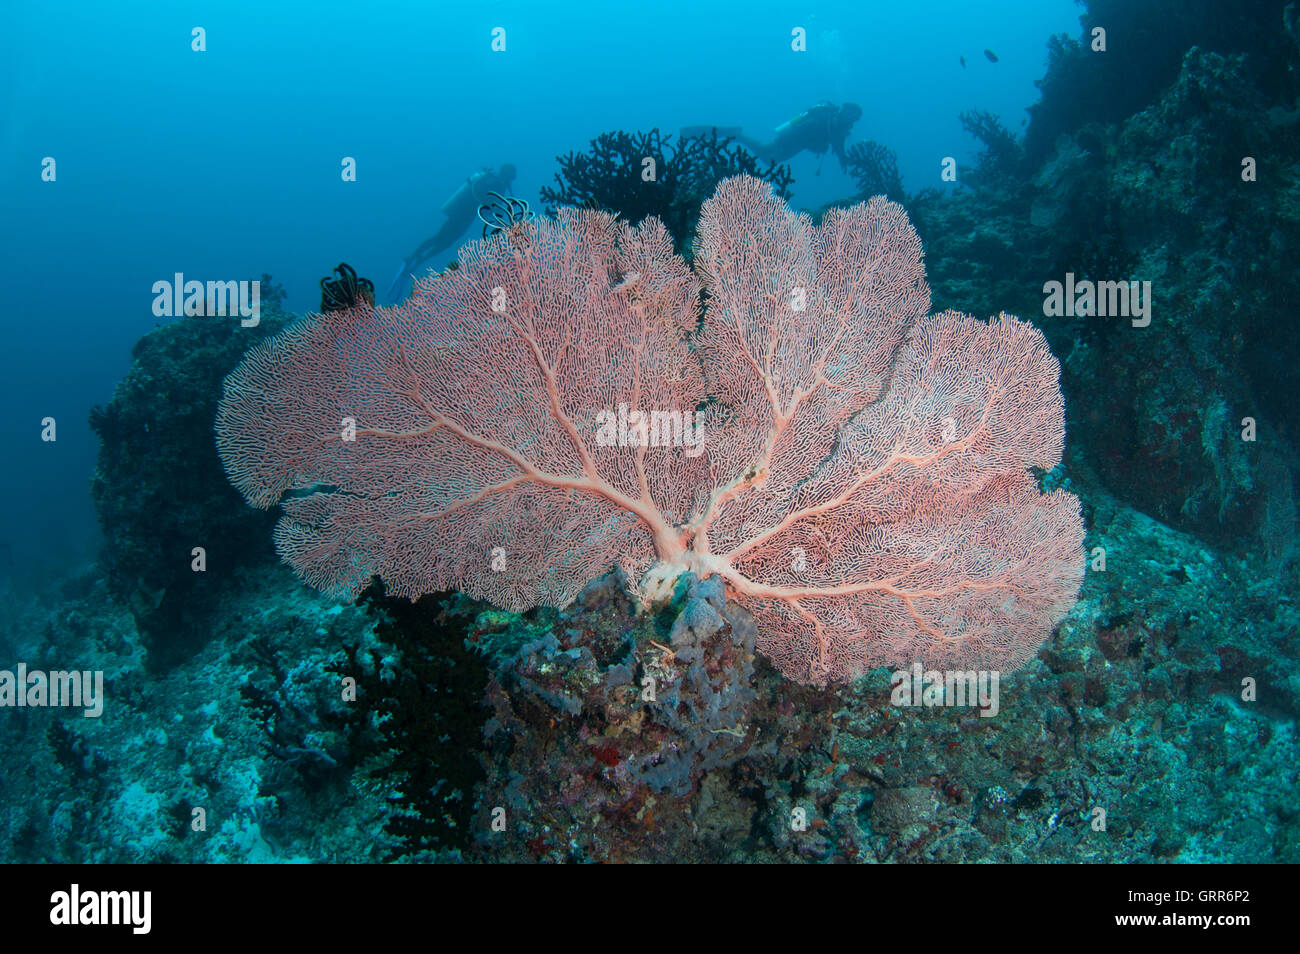 Large fan coral at Vakarufalhi ethere thila in south ari atoll Stock Photo